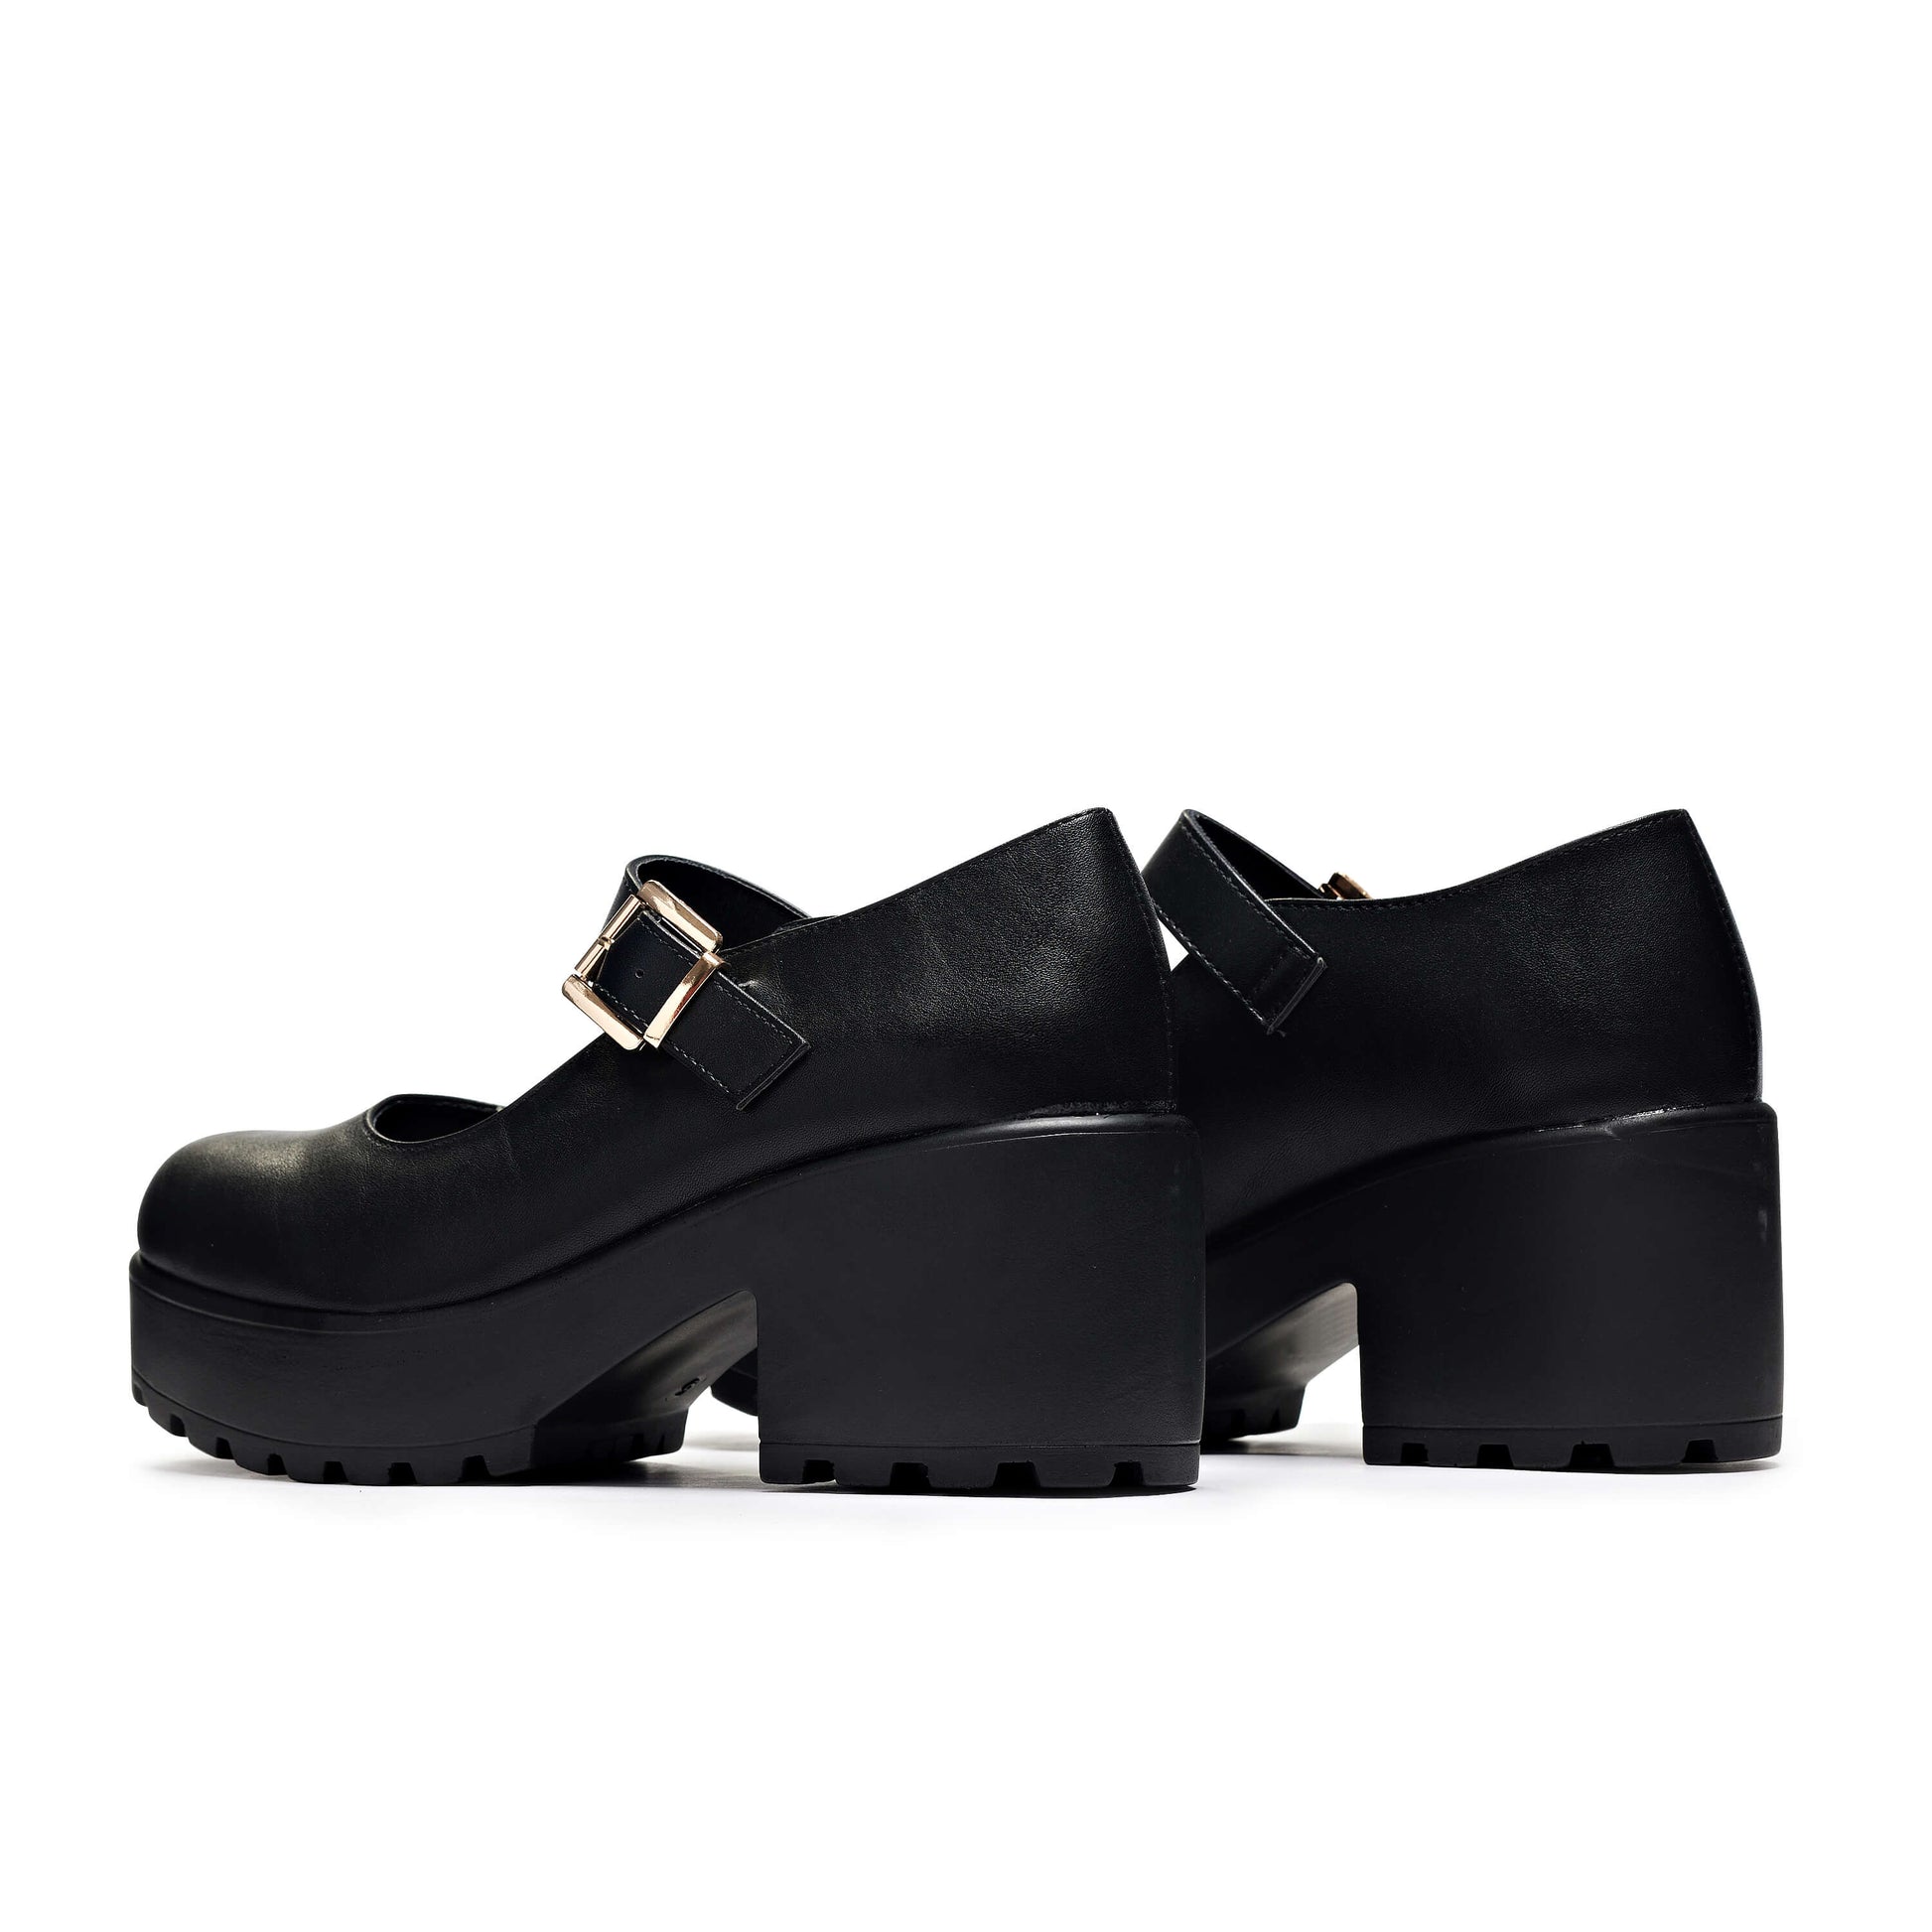 Tira Mary Jane Shoes 'Faux Leather Edition' - Mary Janes - KOI Footwear - Black - Back View